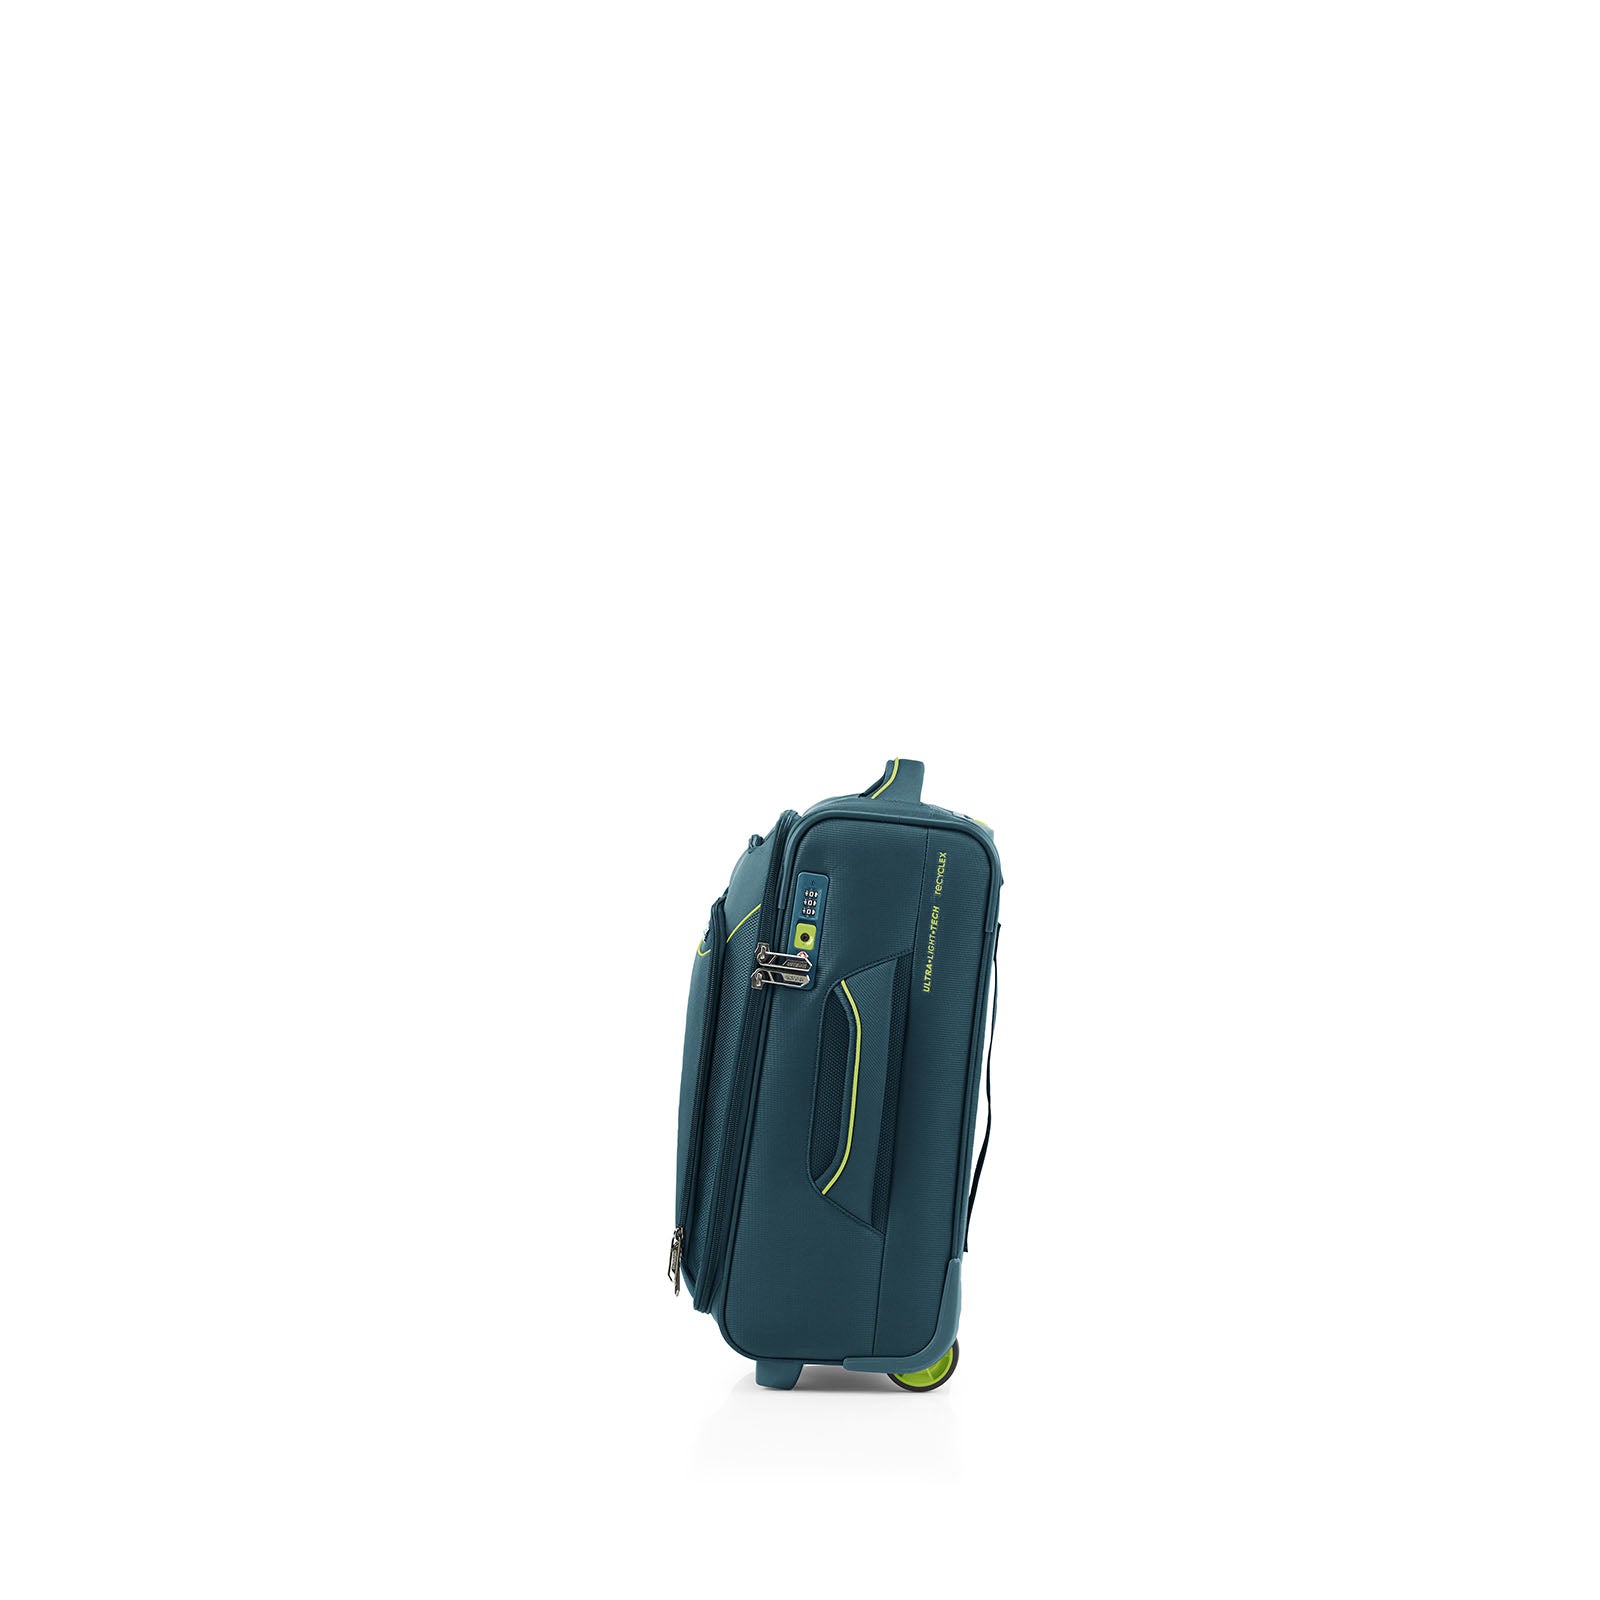 American-Tourister-Applite-4-Eco-50cm-Carry-On-Suitcase-Varsity-Green-Side